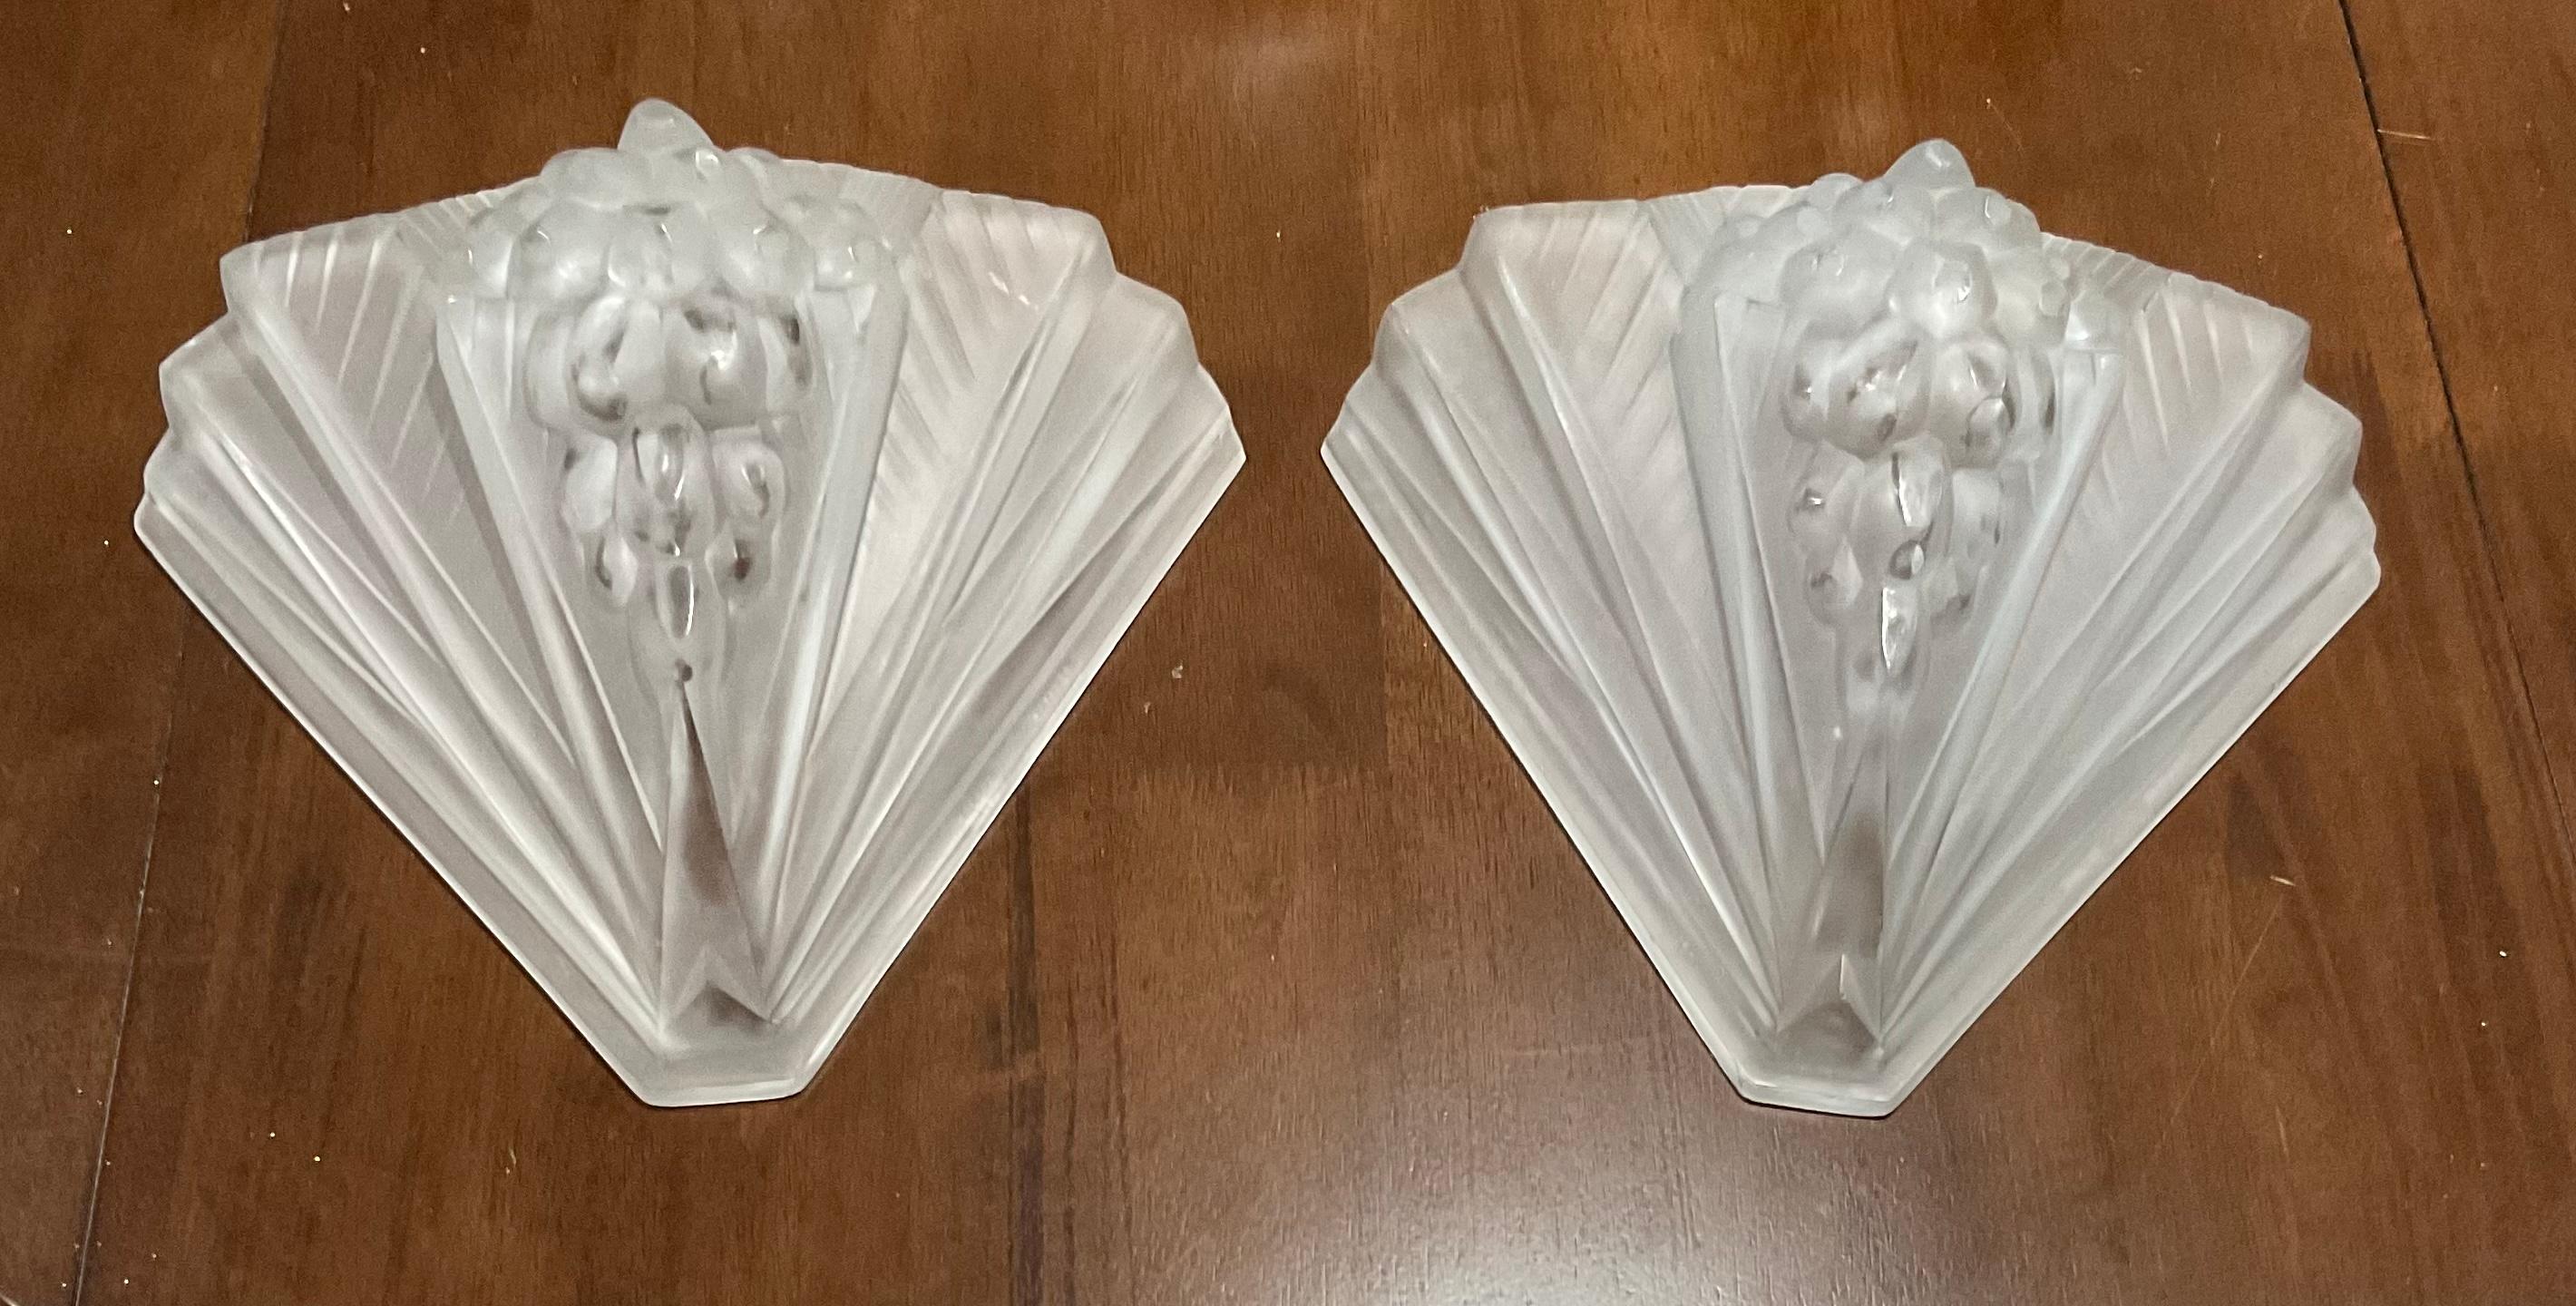 Pair French Art Deco Signed Art Glass Sconces with Original Mounts, circa 1930s For Sale 3